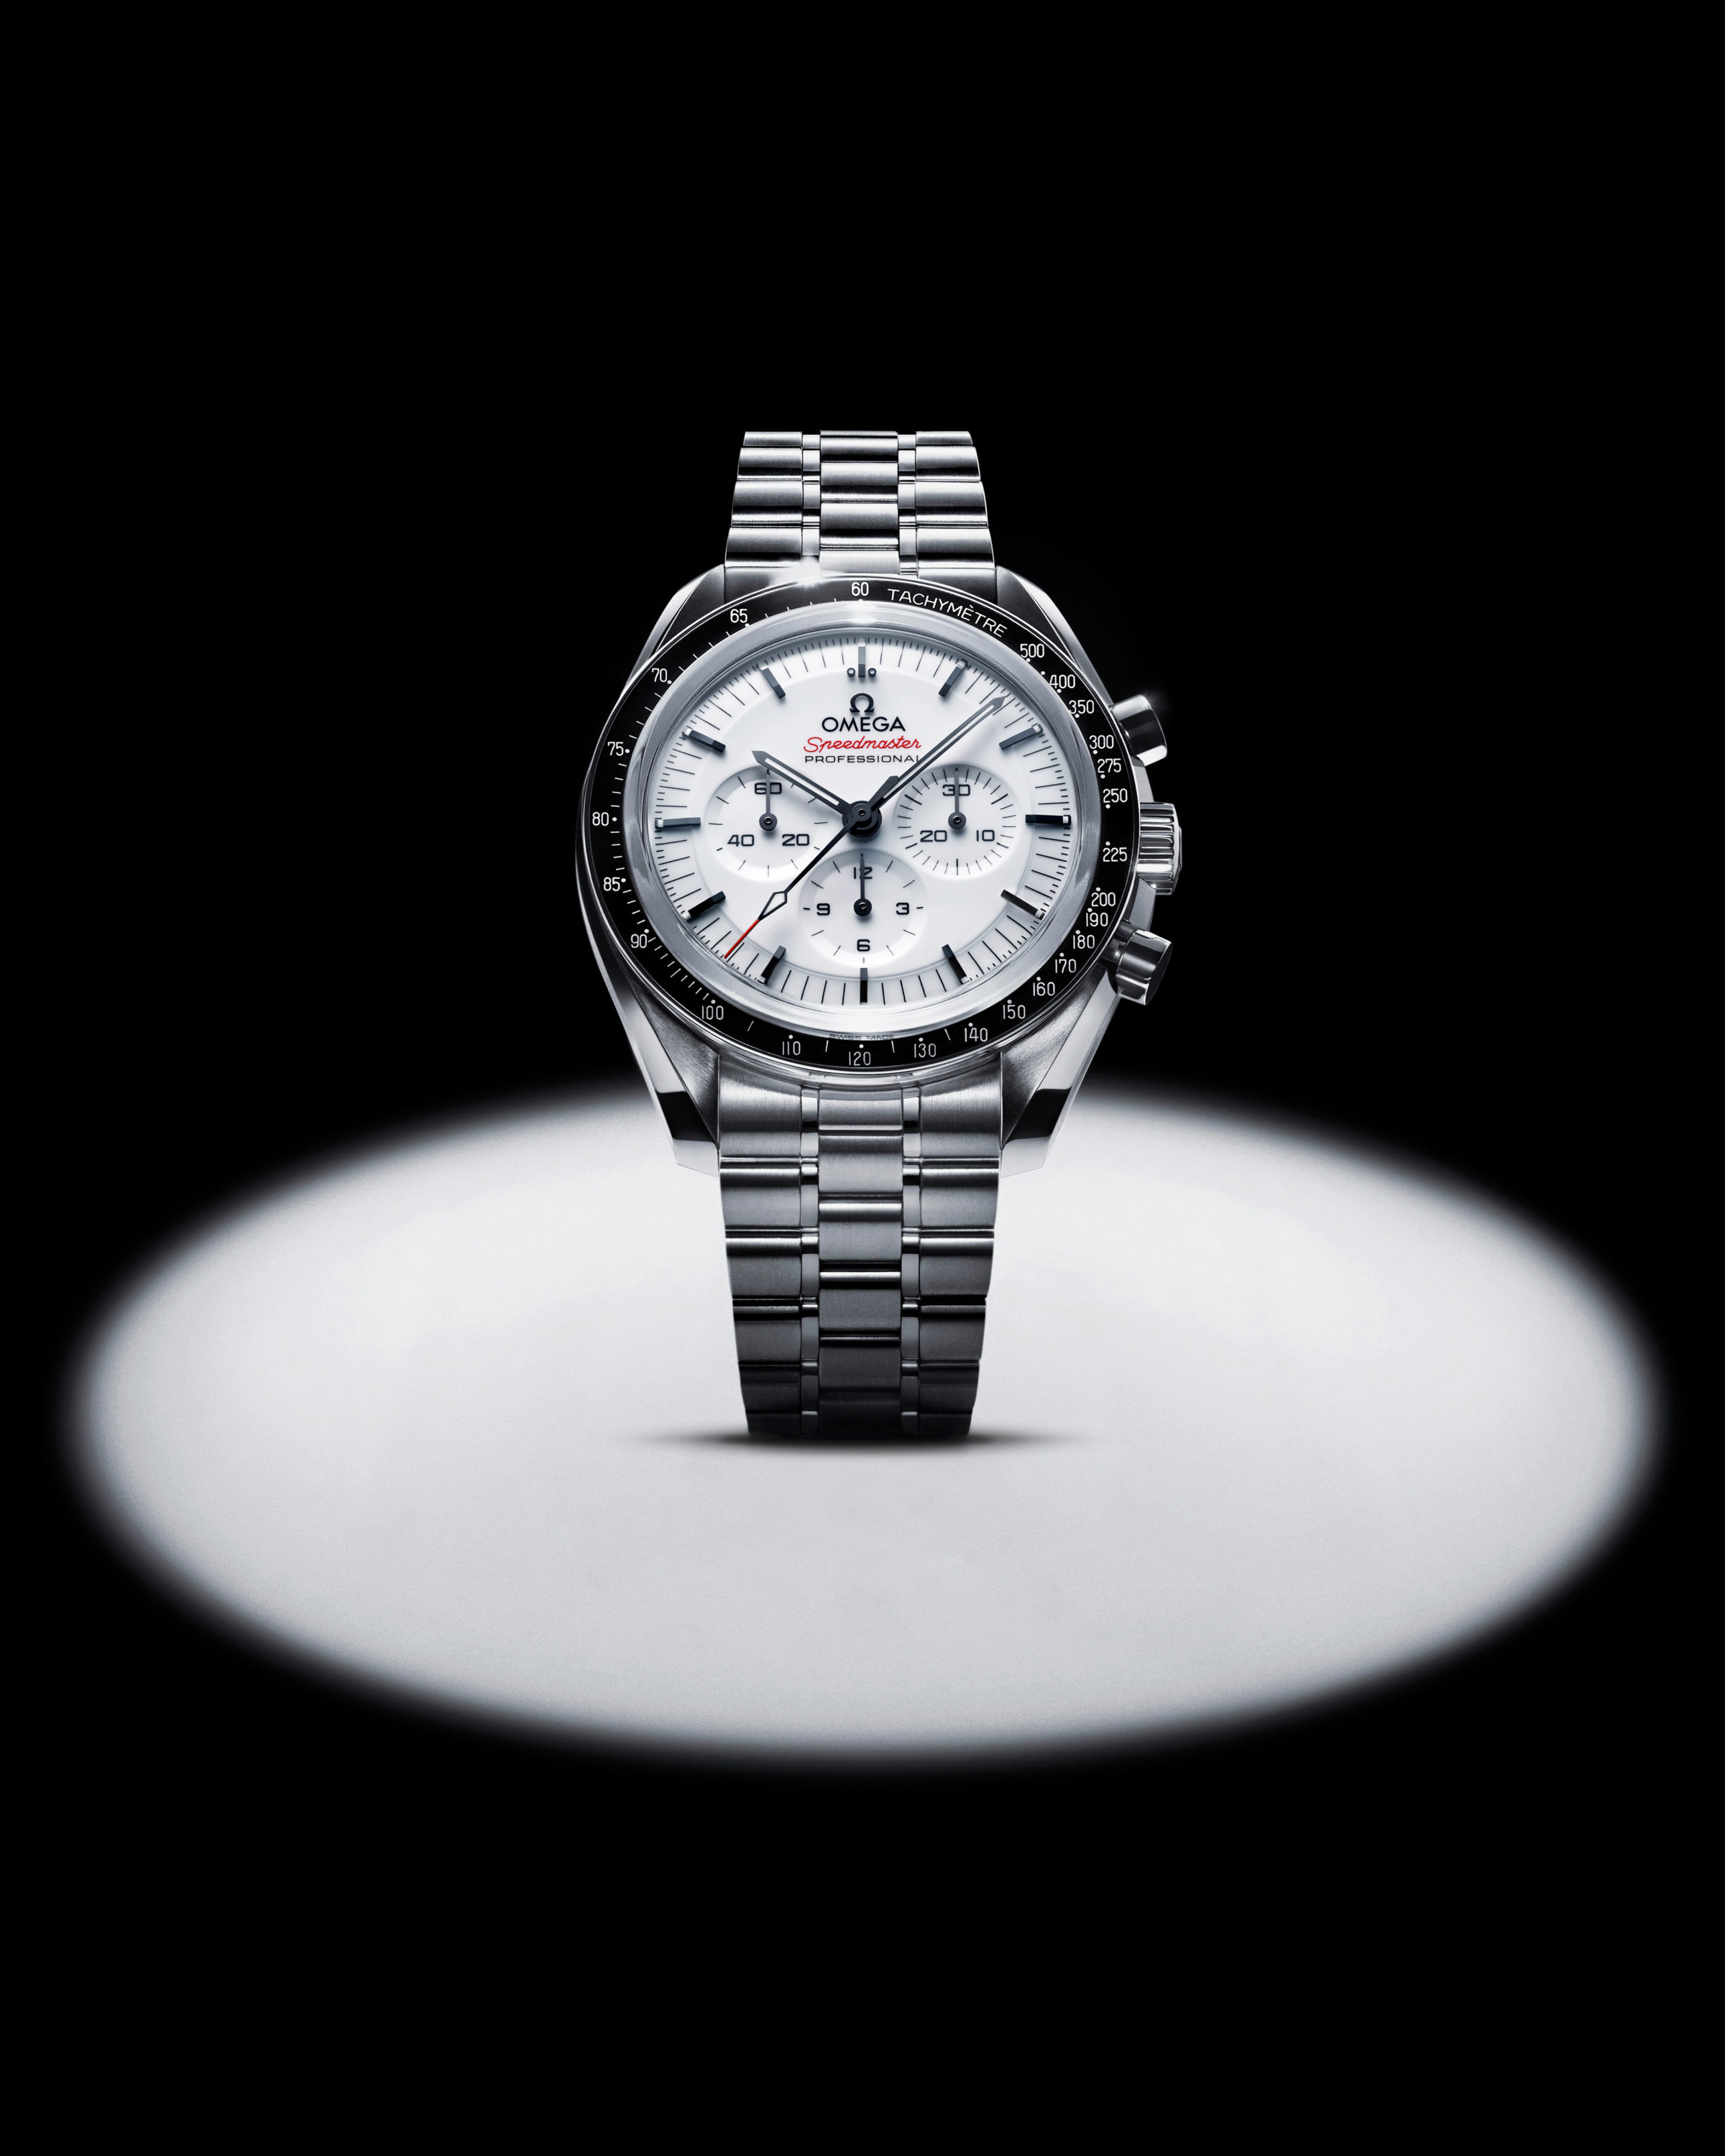 Breaking News: Omega Launches Speedmaster with a White Lacquer Dial